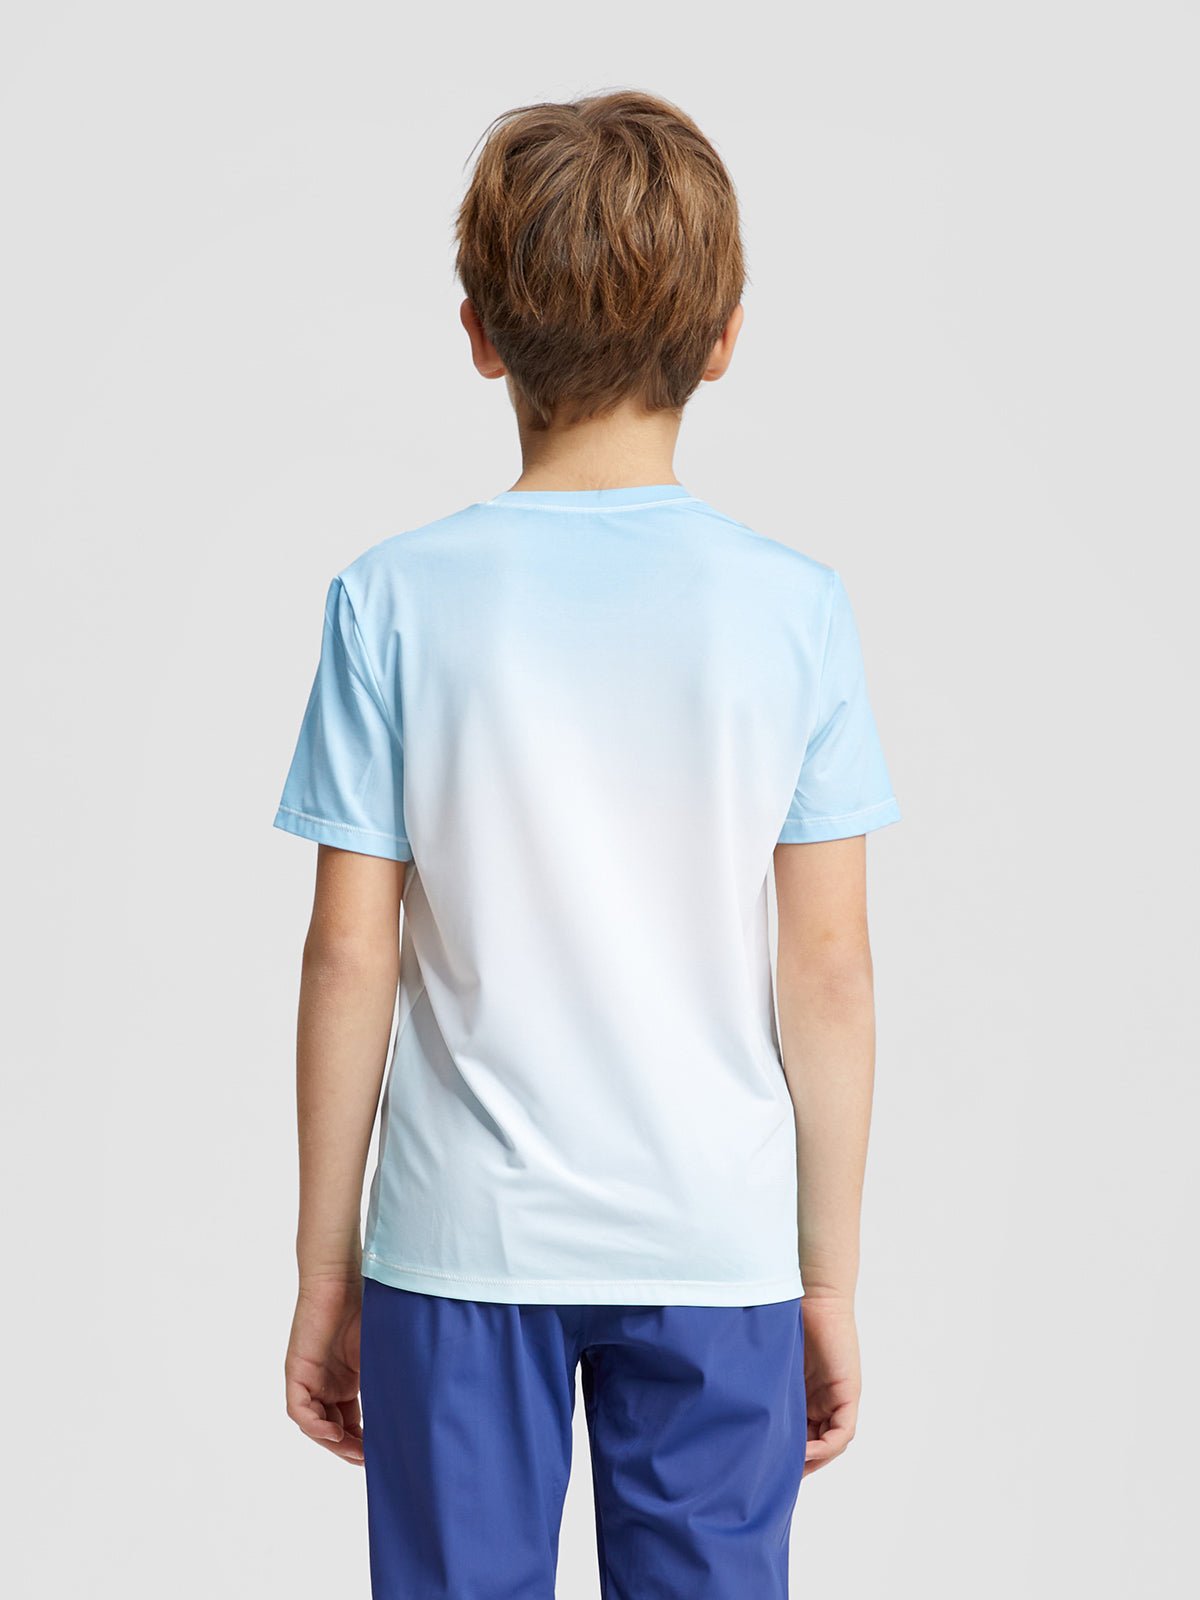 Dip-Dyed Tee for Boys